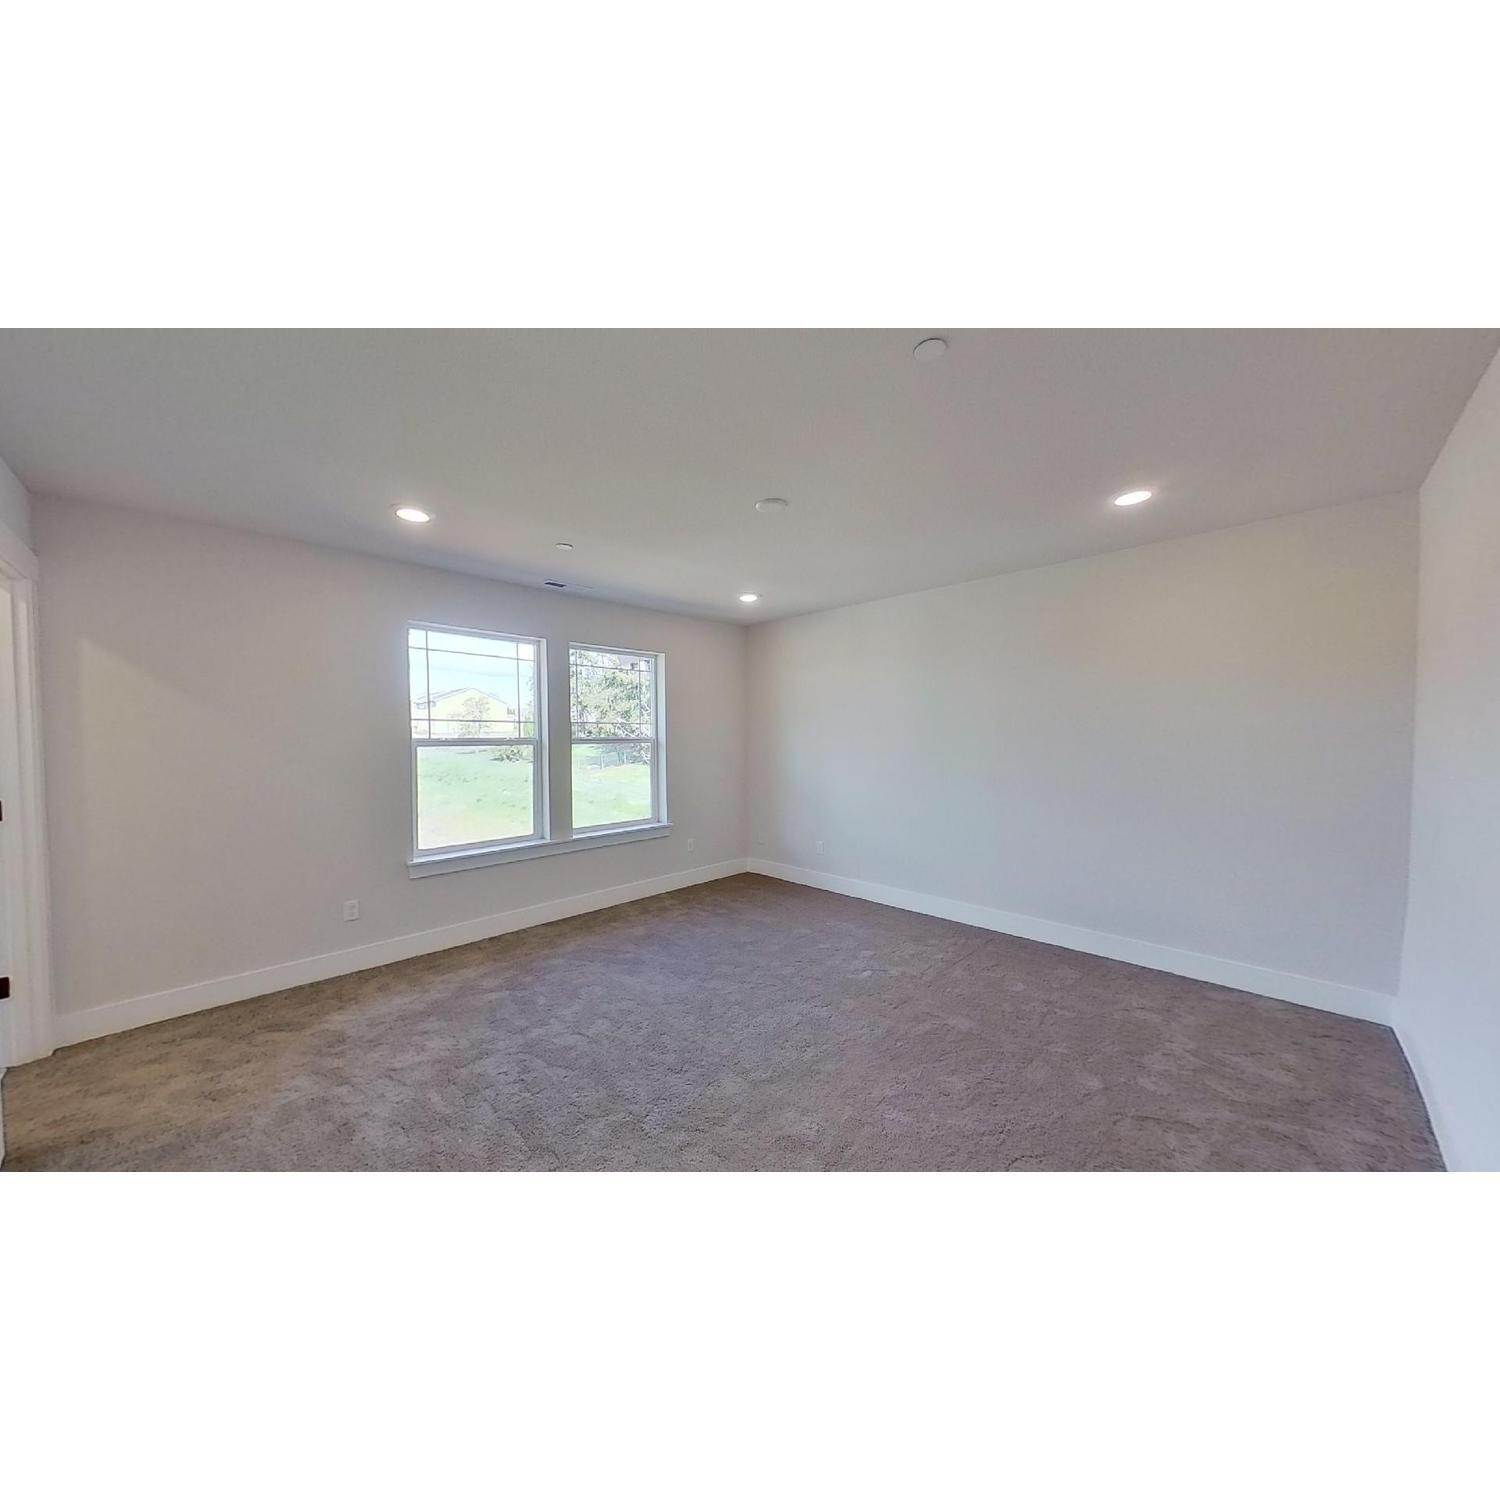 50. 16786 SW Leaf Lane, Tigard, OR 97224에 South River Terrace Innovate Condominiums 건물